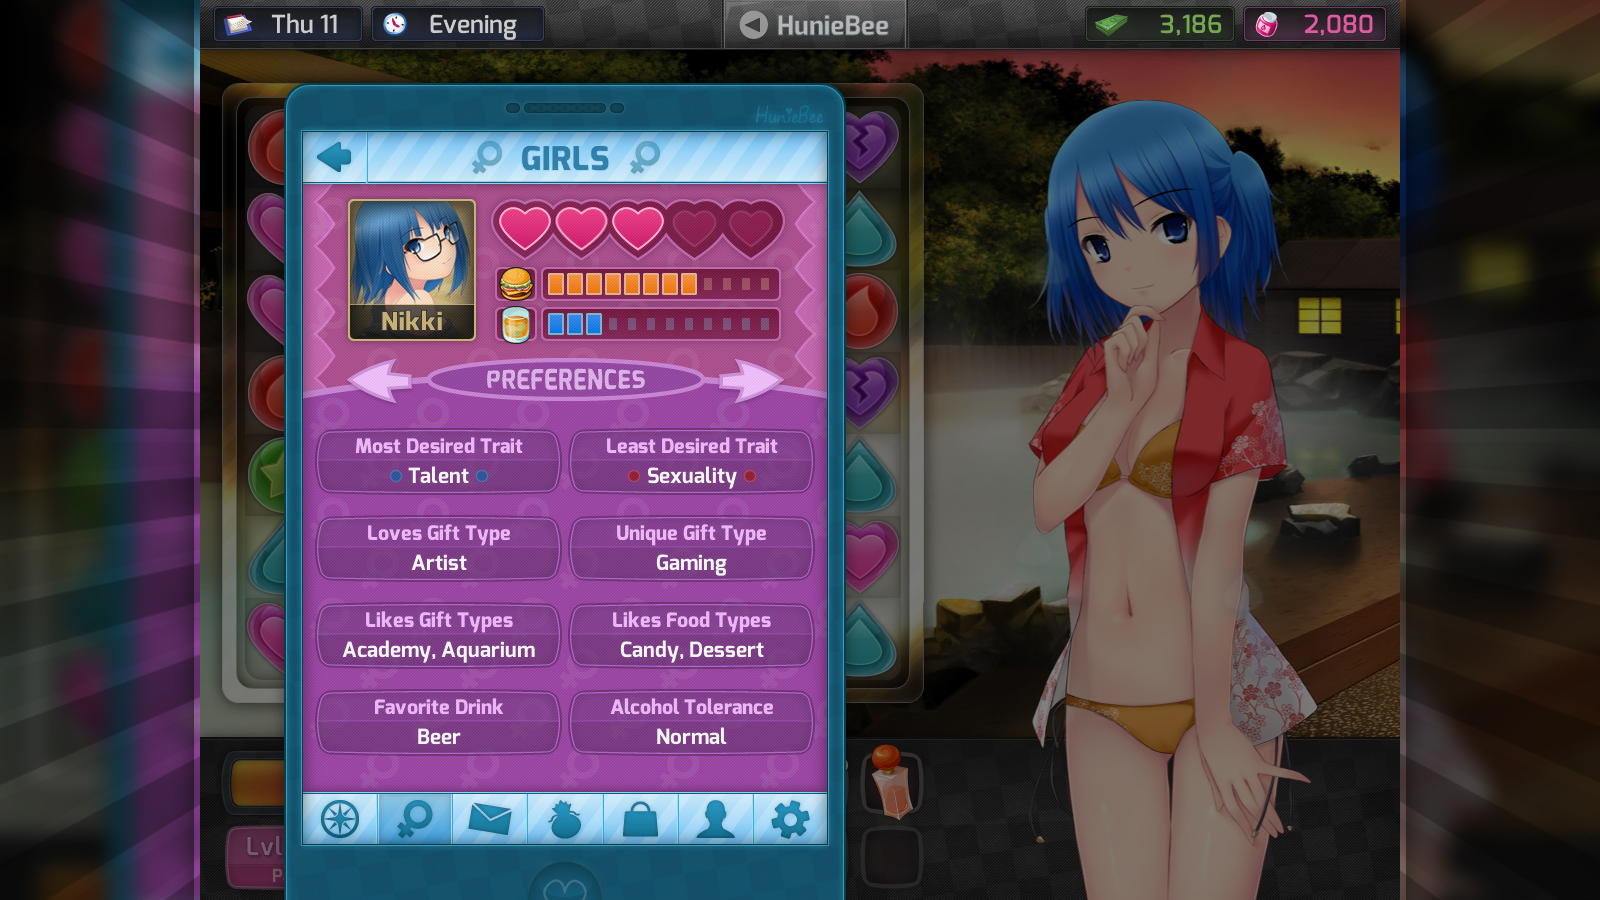 divya dube share is there nudity in huniepop photos